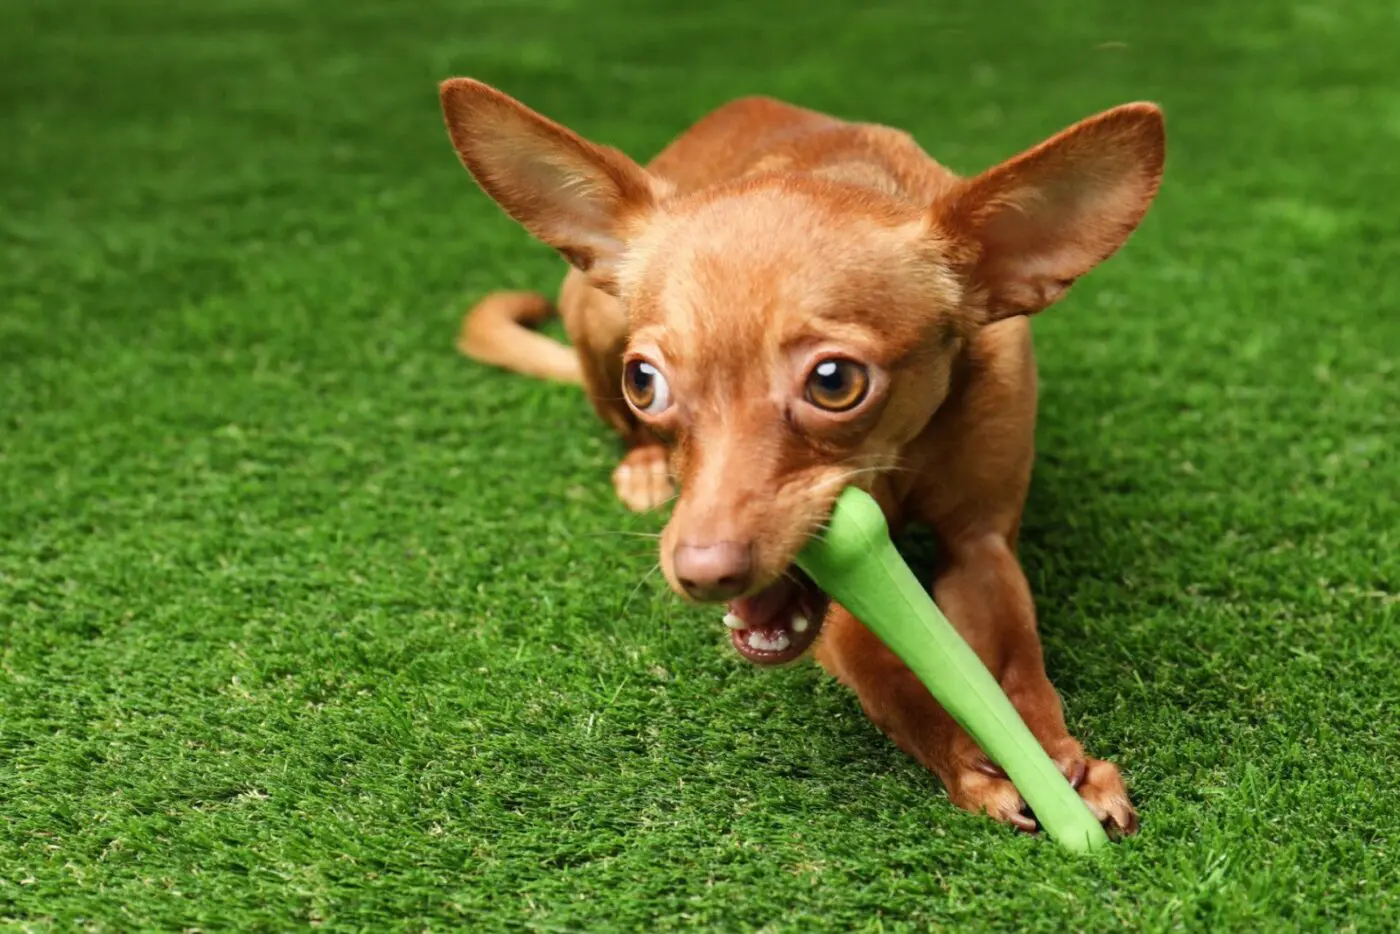 A small brown dog with large ears is chewing on a green plastic bone toy while standing on pet-friendly artificial turf in Gilbert, AZ. The dog looks alert and playful.